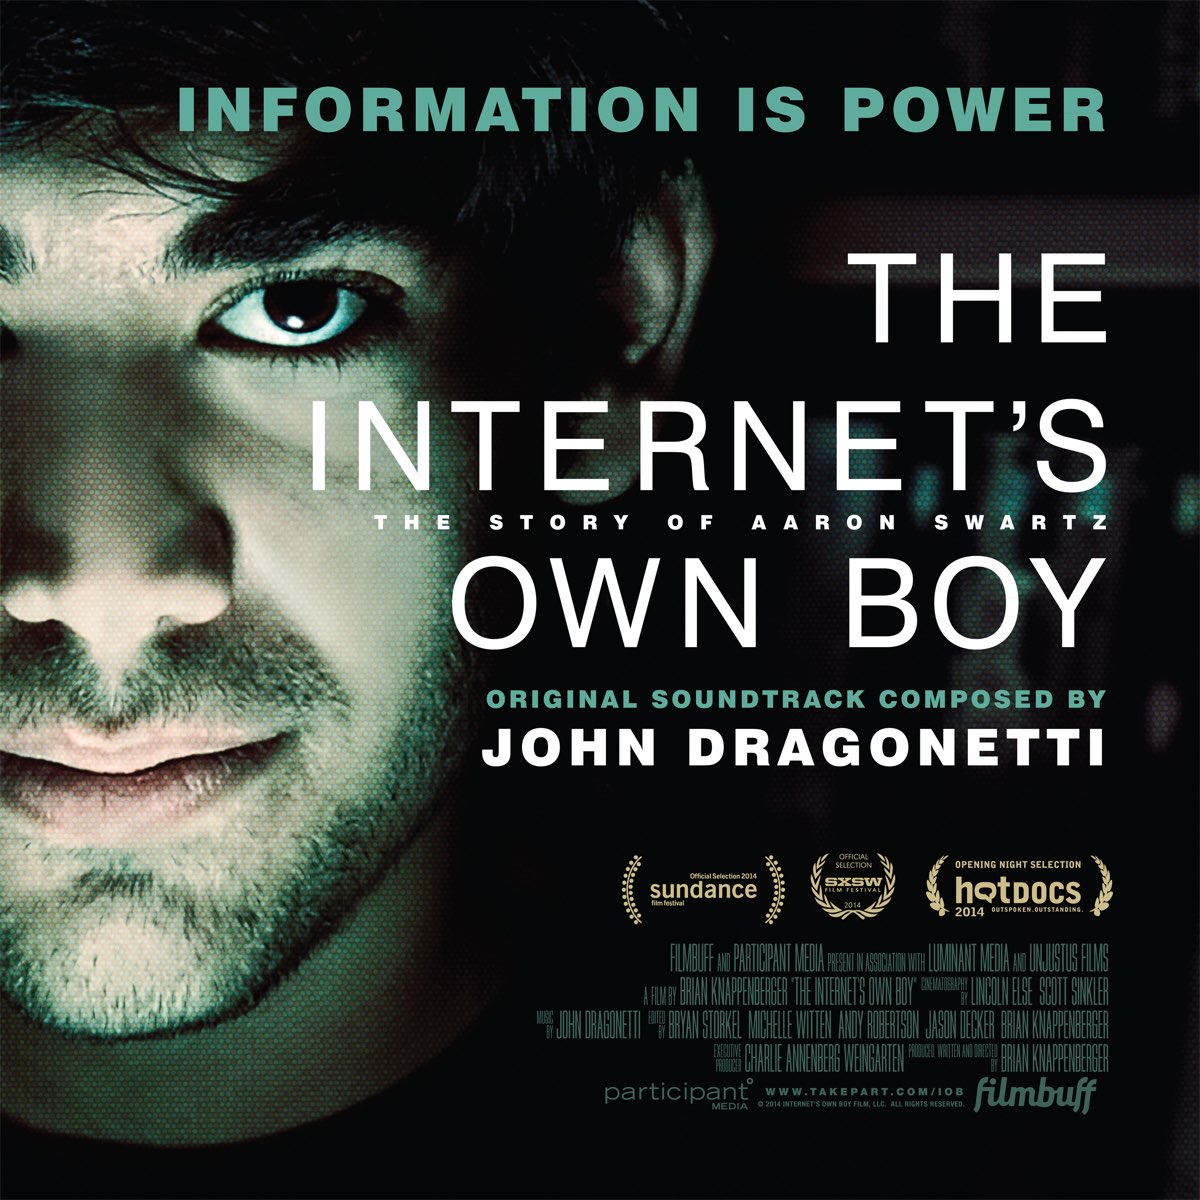 The Internet’s own boy. Poster the Internet’s own boy. The Internet’s own boy (2014). 1. The Internet’s own boy.